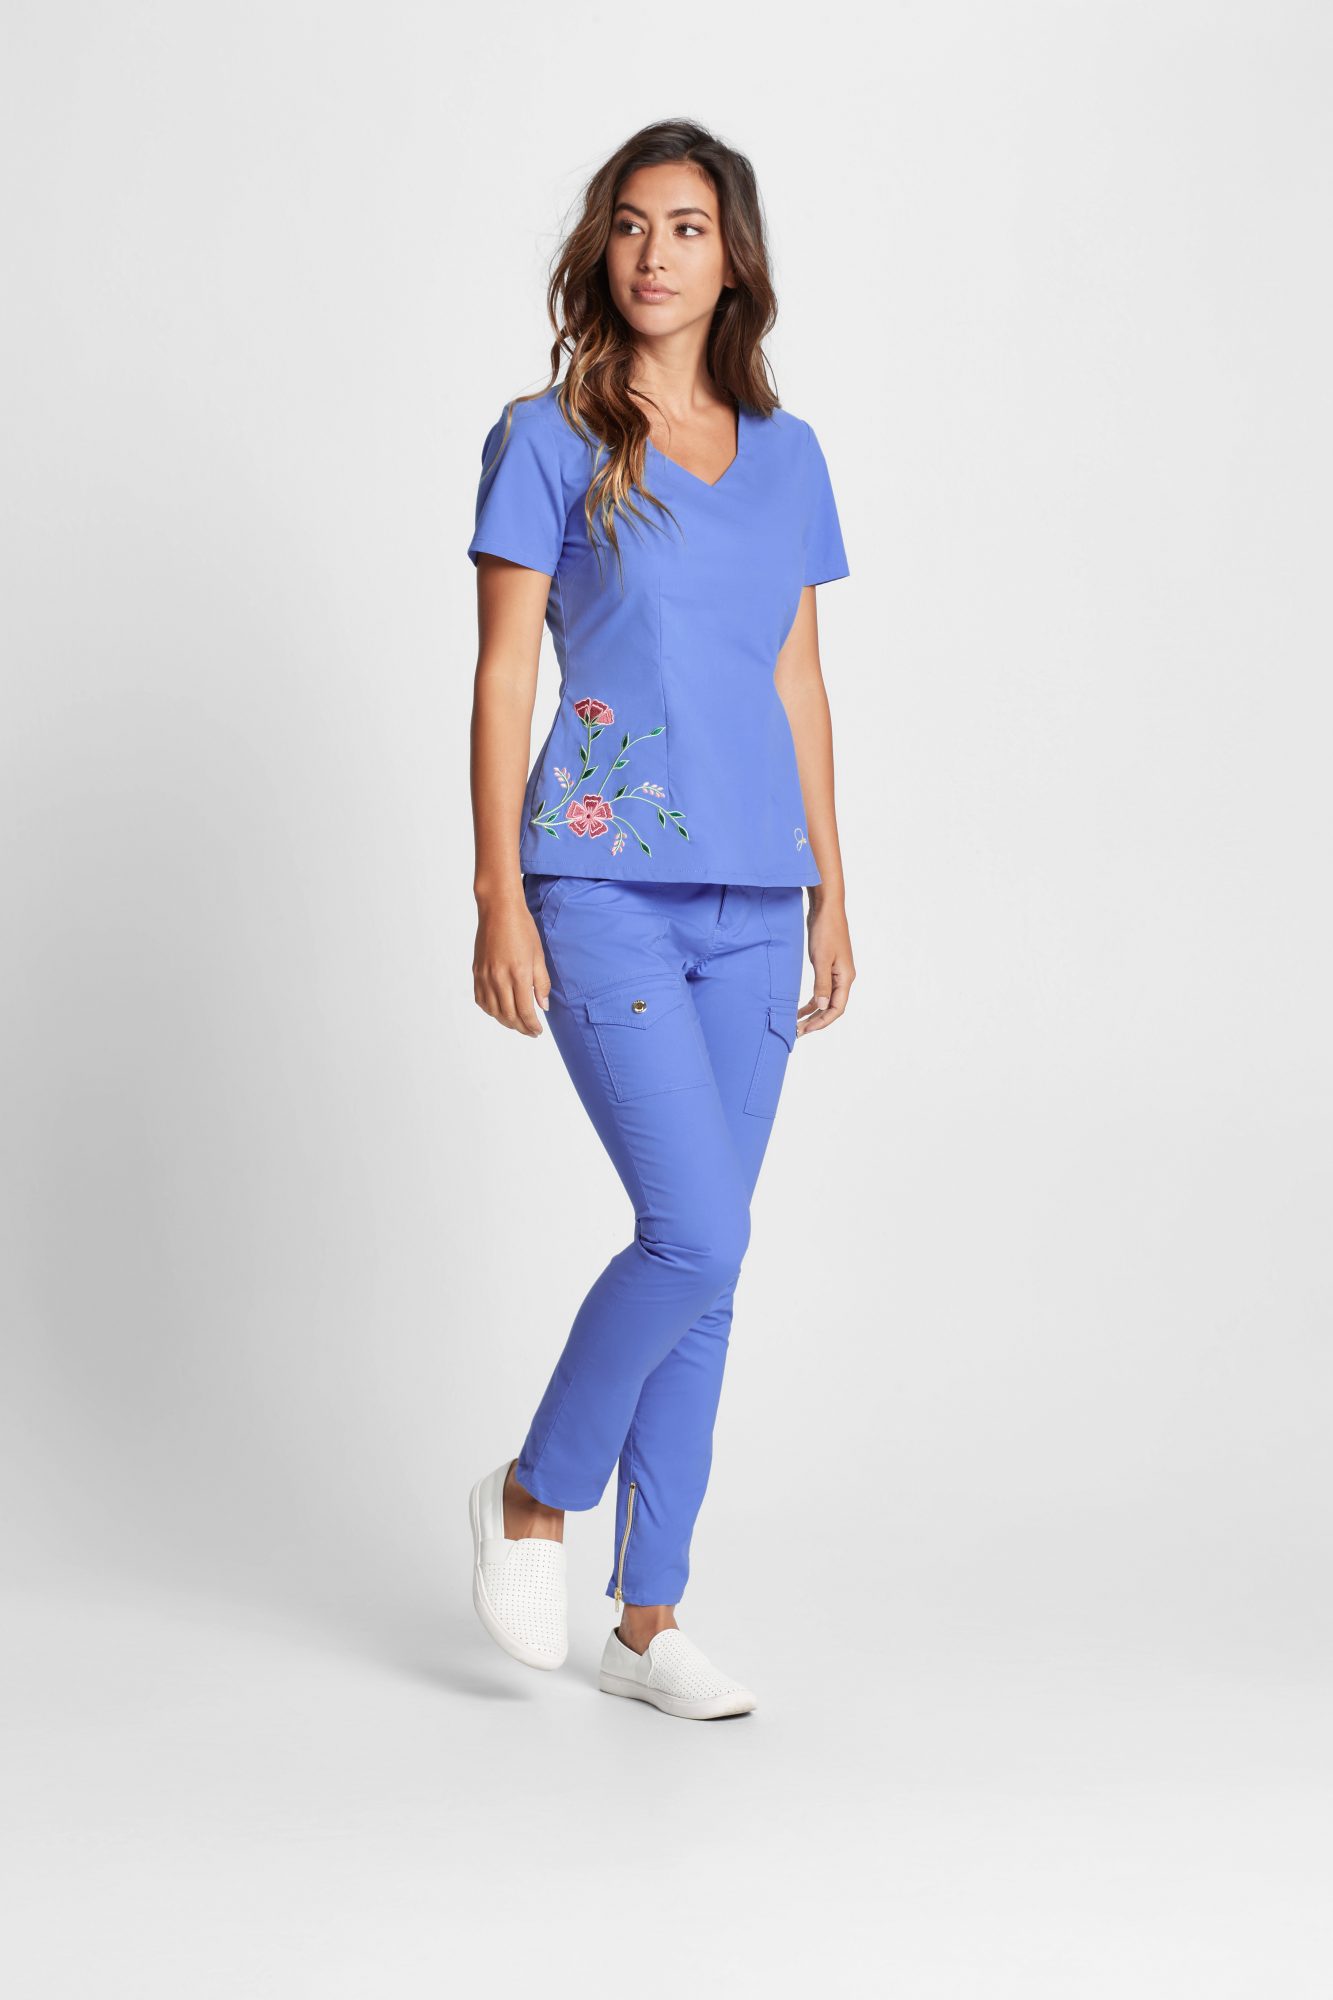 This company is making stylish scrubs so doctors and nurses can